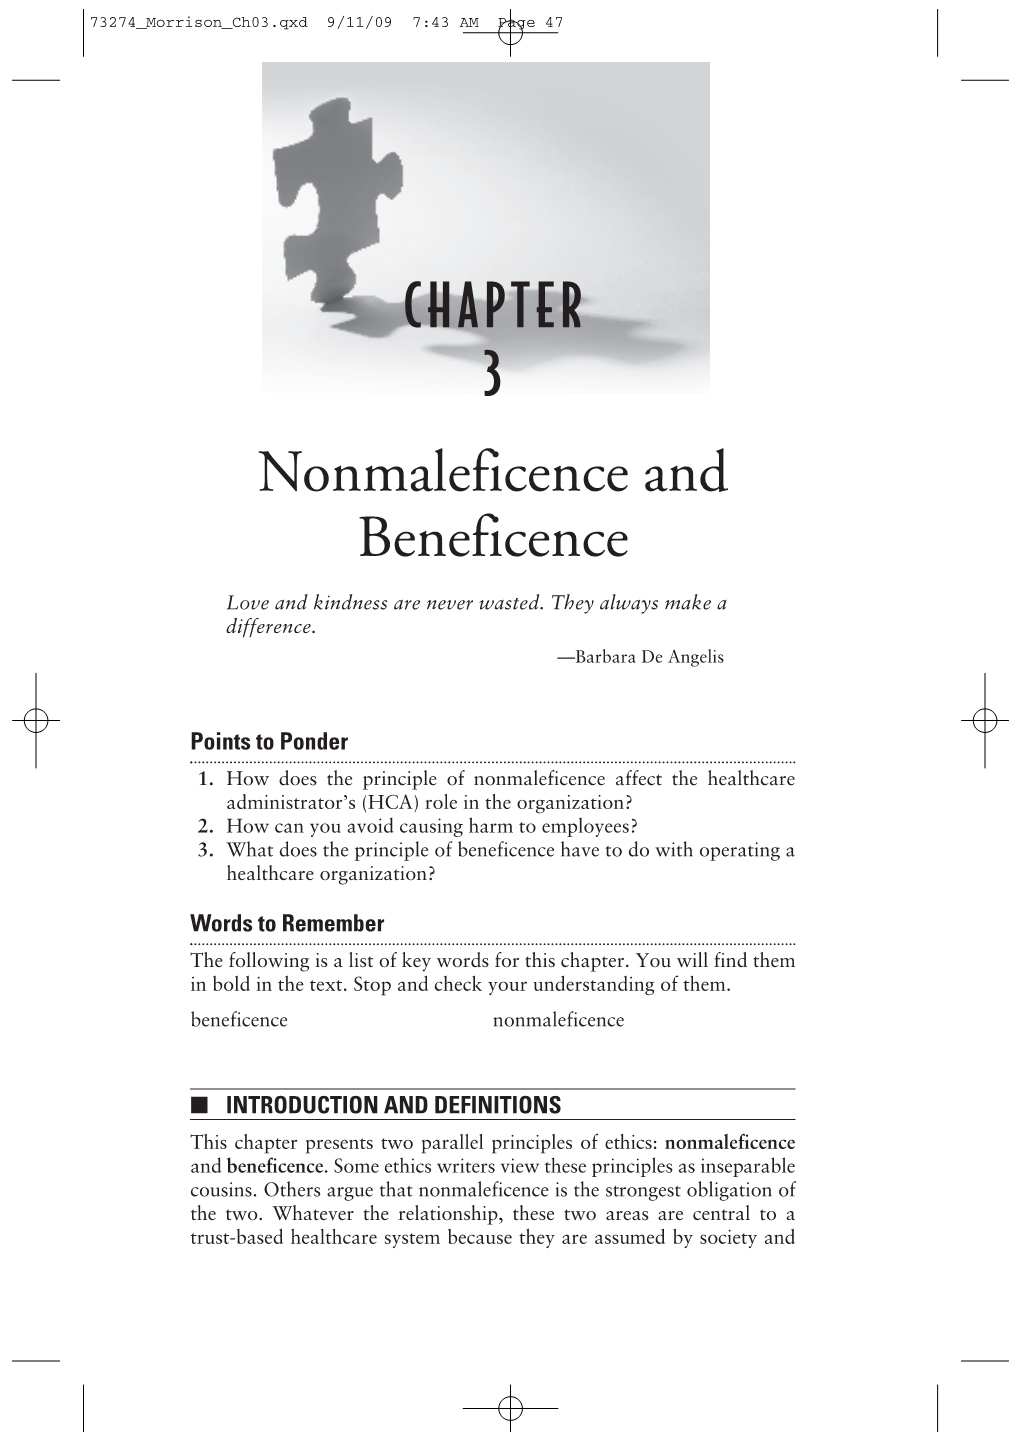 CHAPTER 3 Nonmaleficence and Beneficence